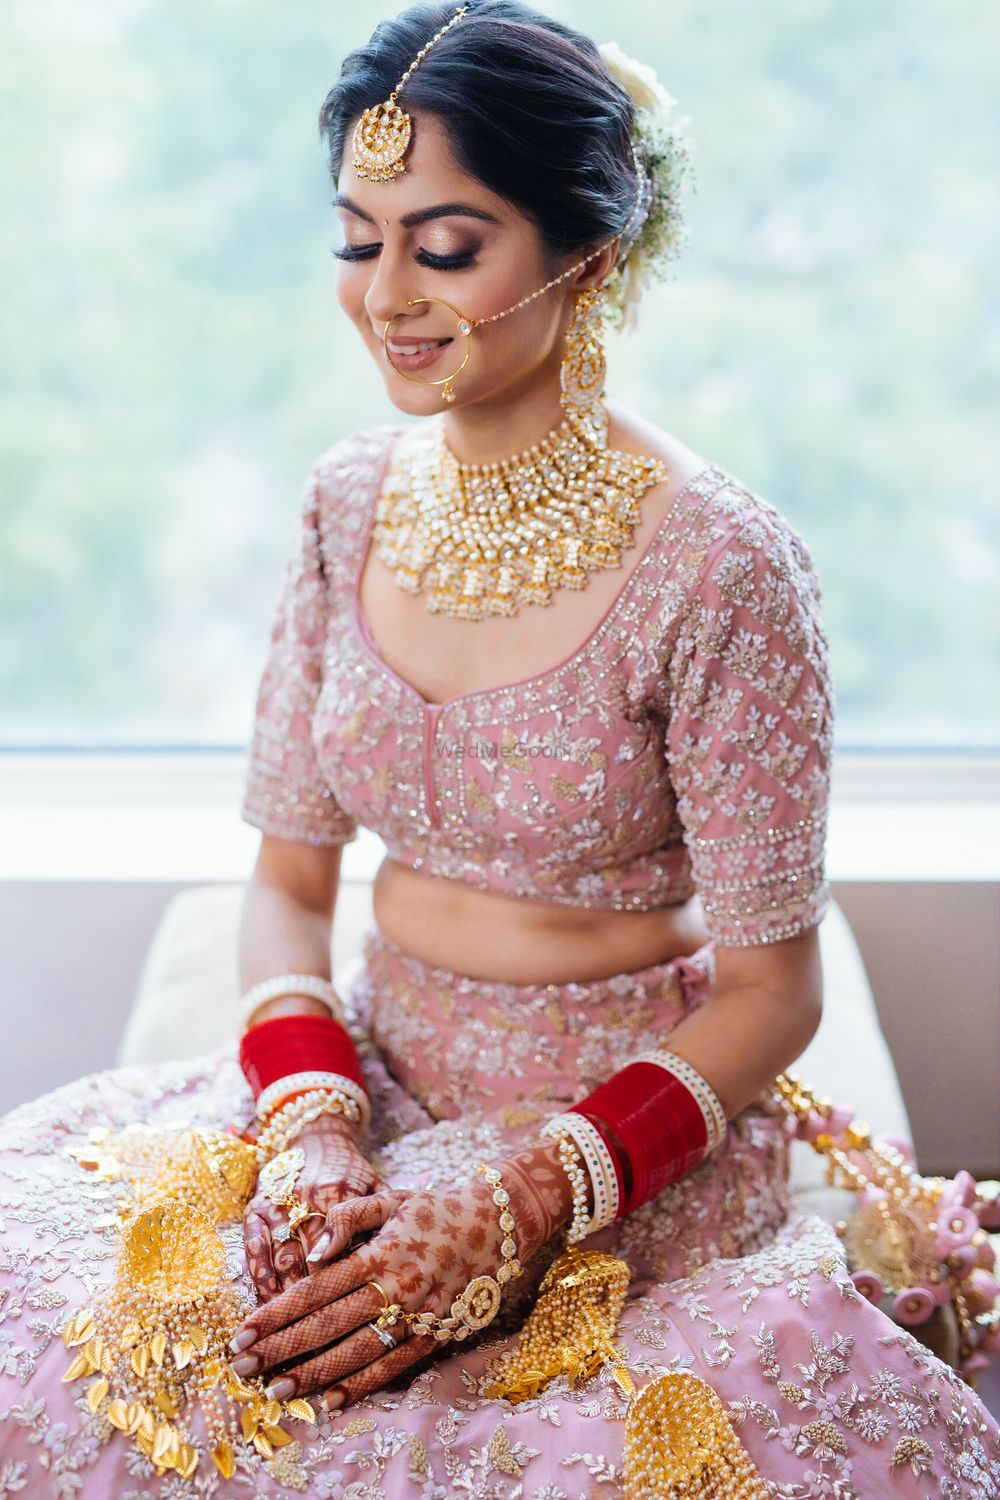 Photo of Bride wearing a pastel pink lehenga with a choker necklace.